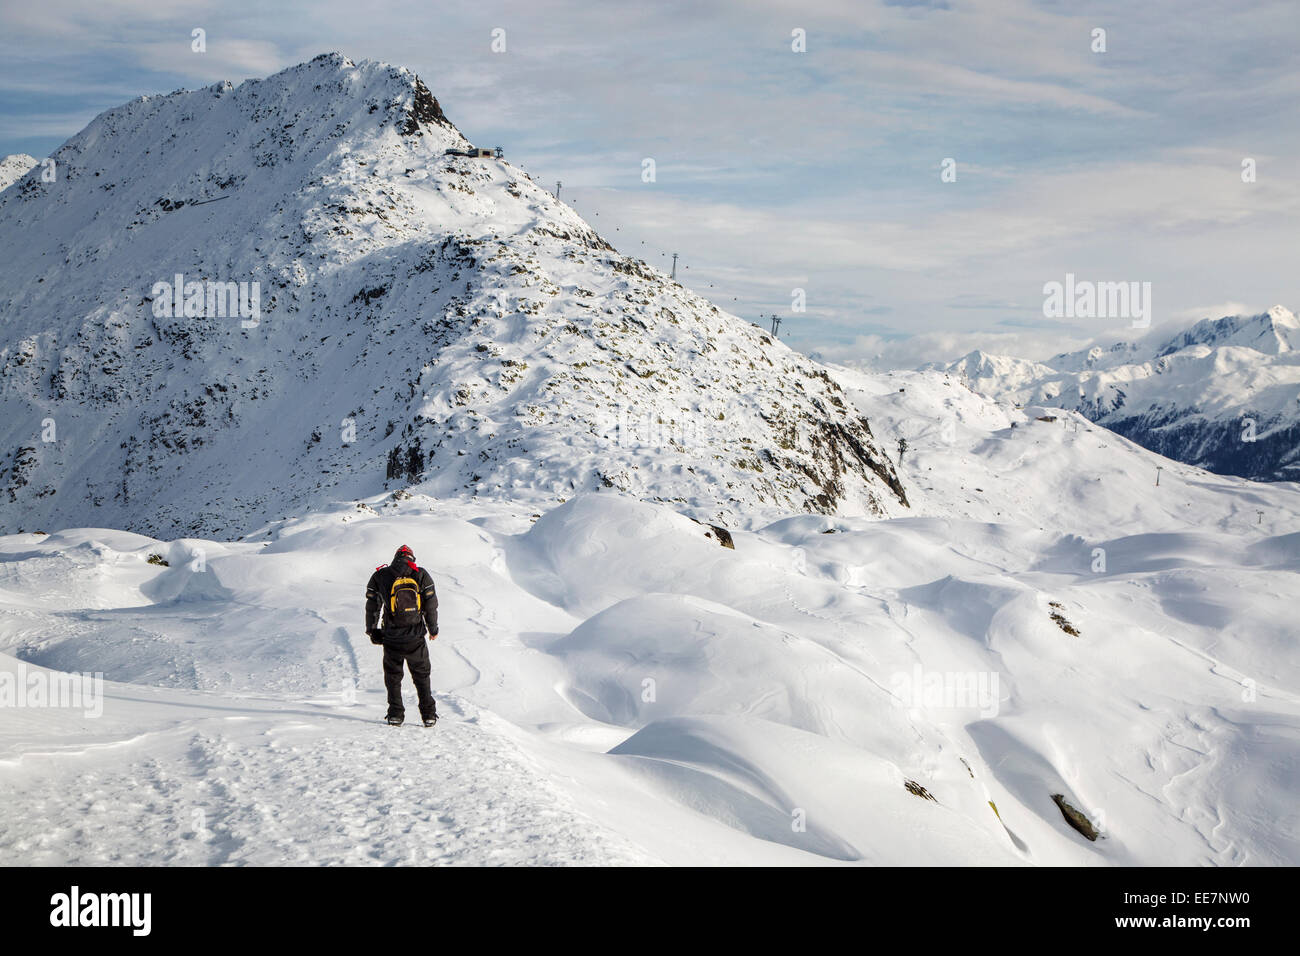 Tourist in the snow looking over the mountains in winter surrounding the Swiss Aletsch Glacier in the Alps, Switzerland Stock Photo